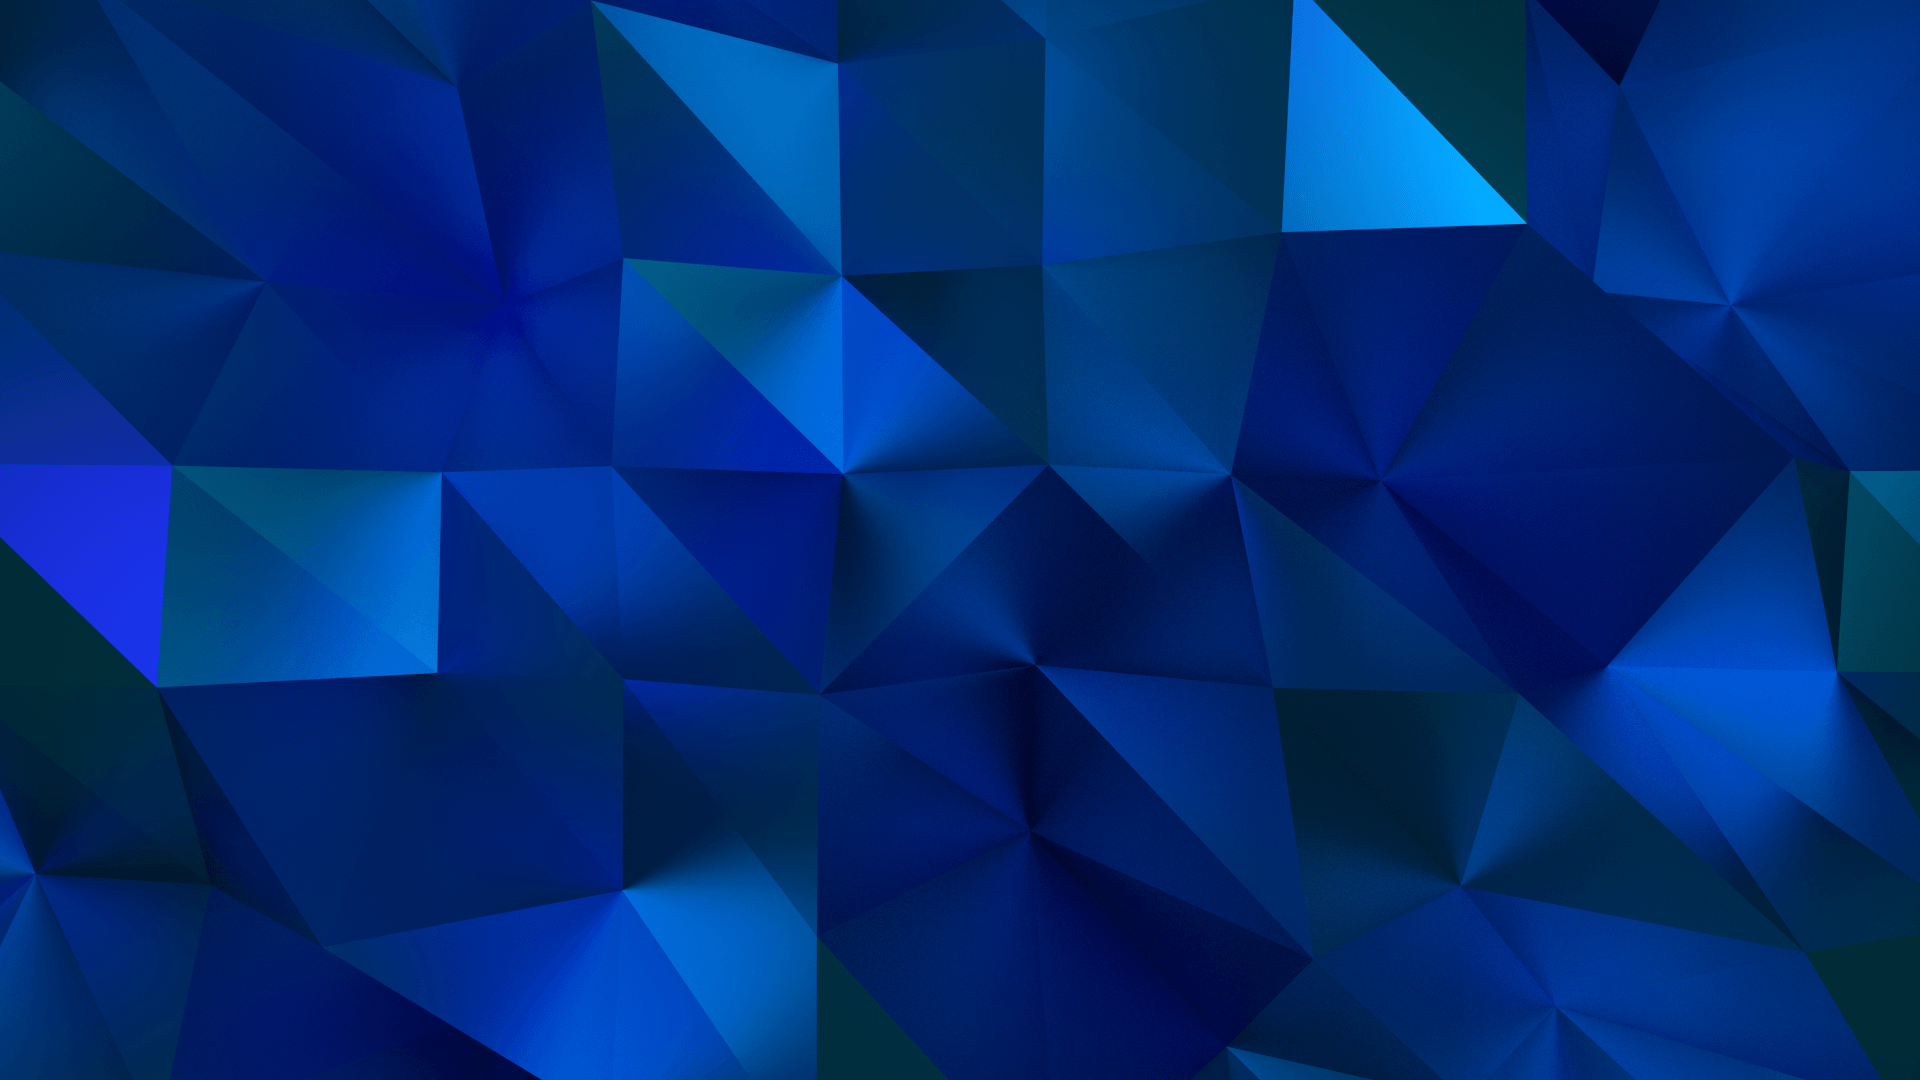 Blue Polygon Wallpapers - Top Free Blue Polygon Backgrounds ...